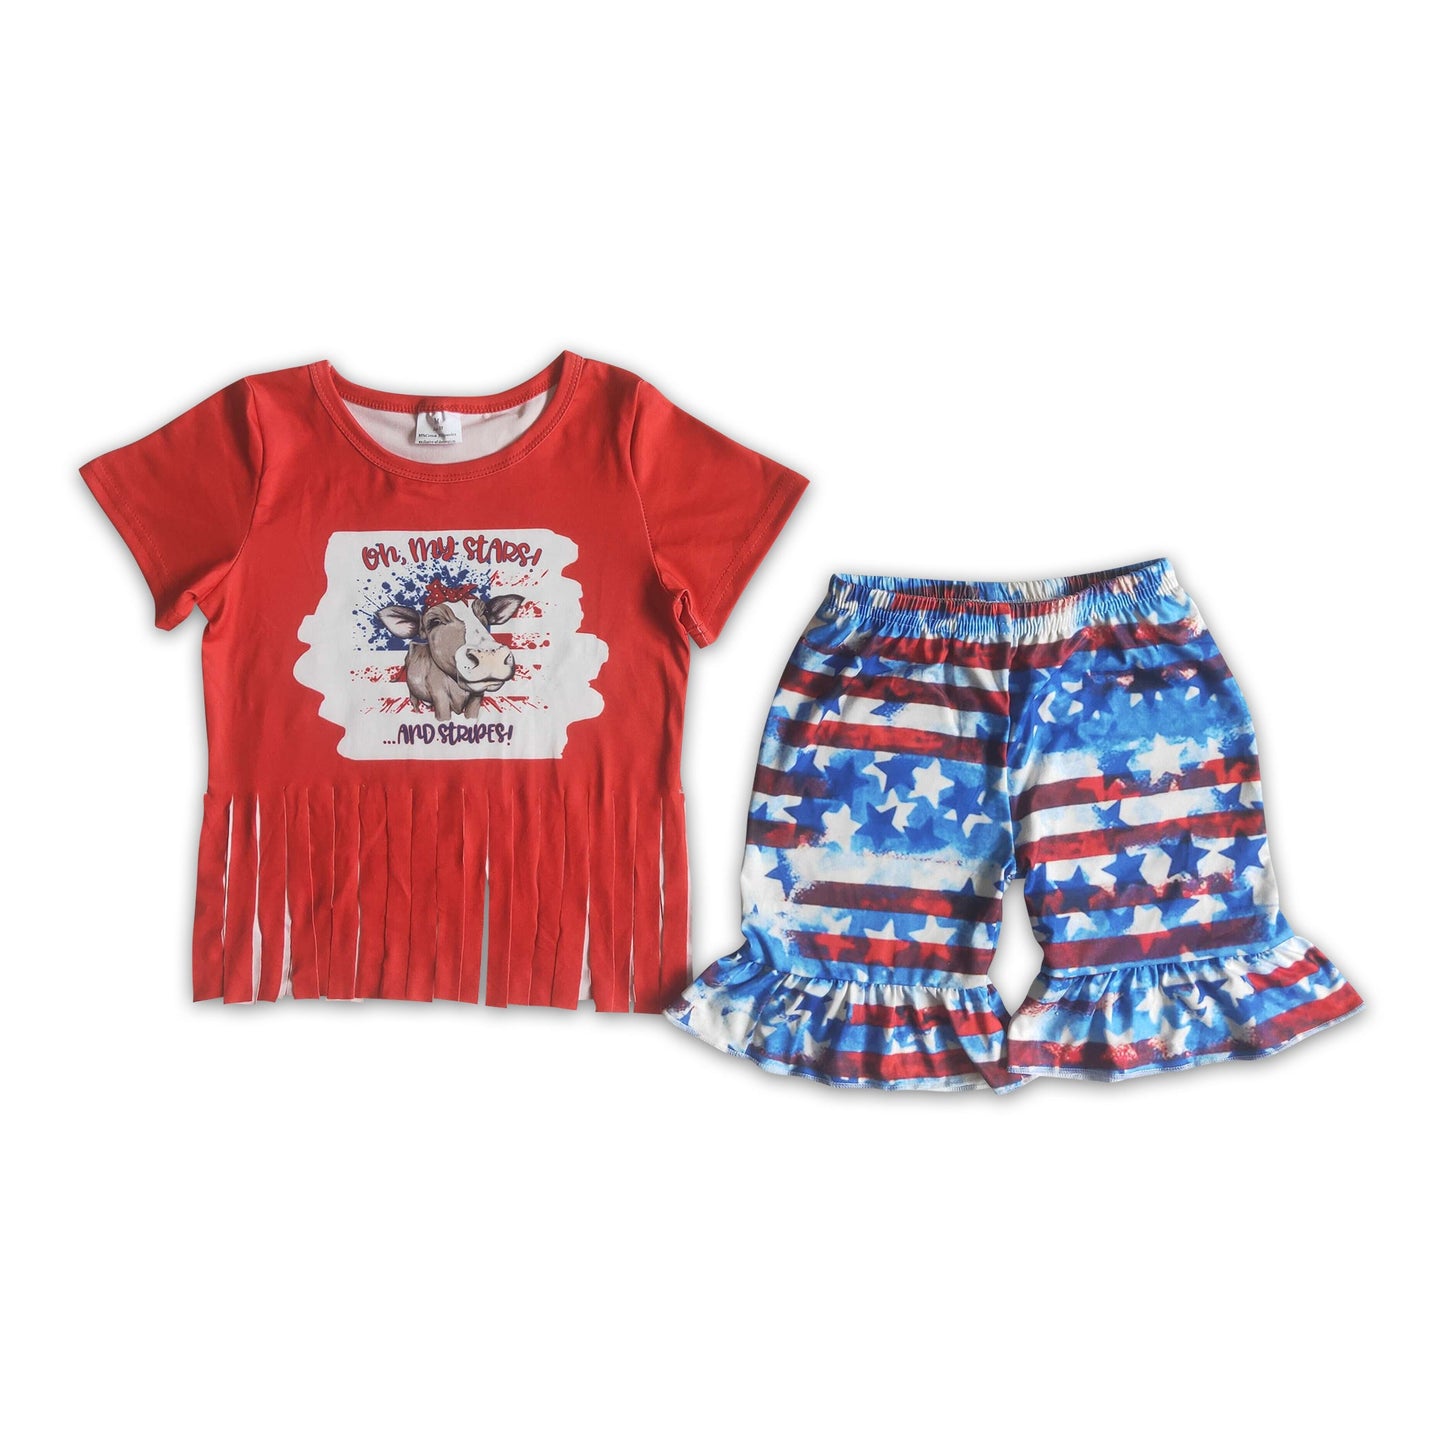 Oh my stars and stripes cow girls 4th of july outfits